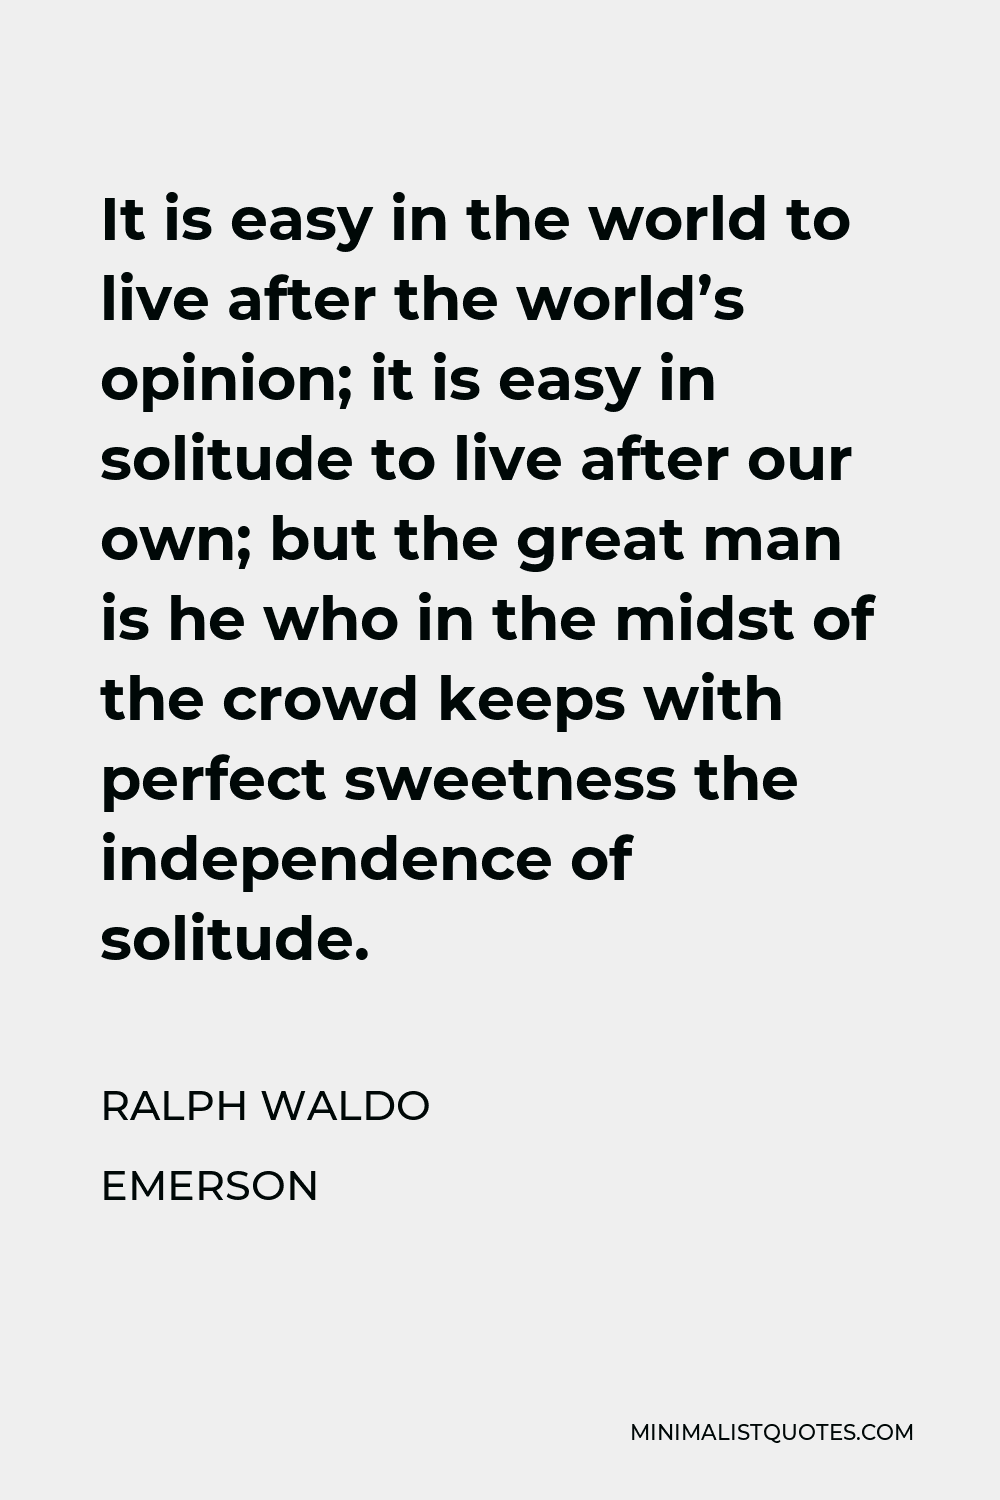 Ralph Waldo Emerson Quote - It is easy in the world to live after the world’s opinion; it is easy in solitude to live after our own; but the great man is he who in the midst of the crowd keeps with perfect sweetness the independence of solitude.